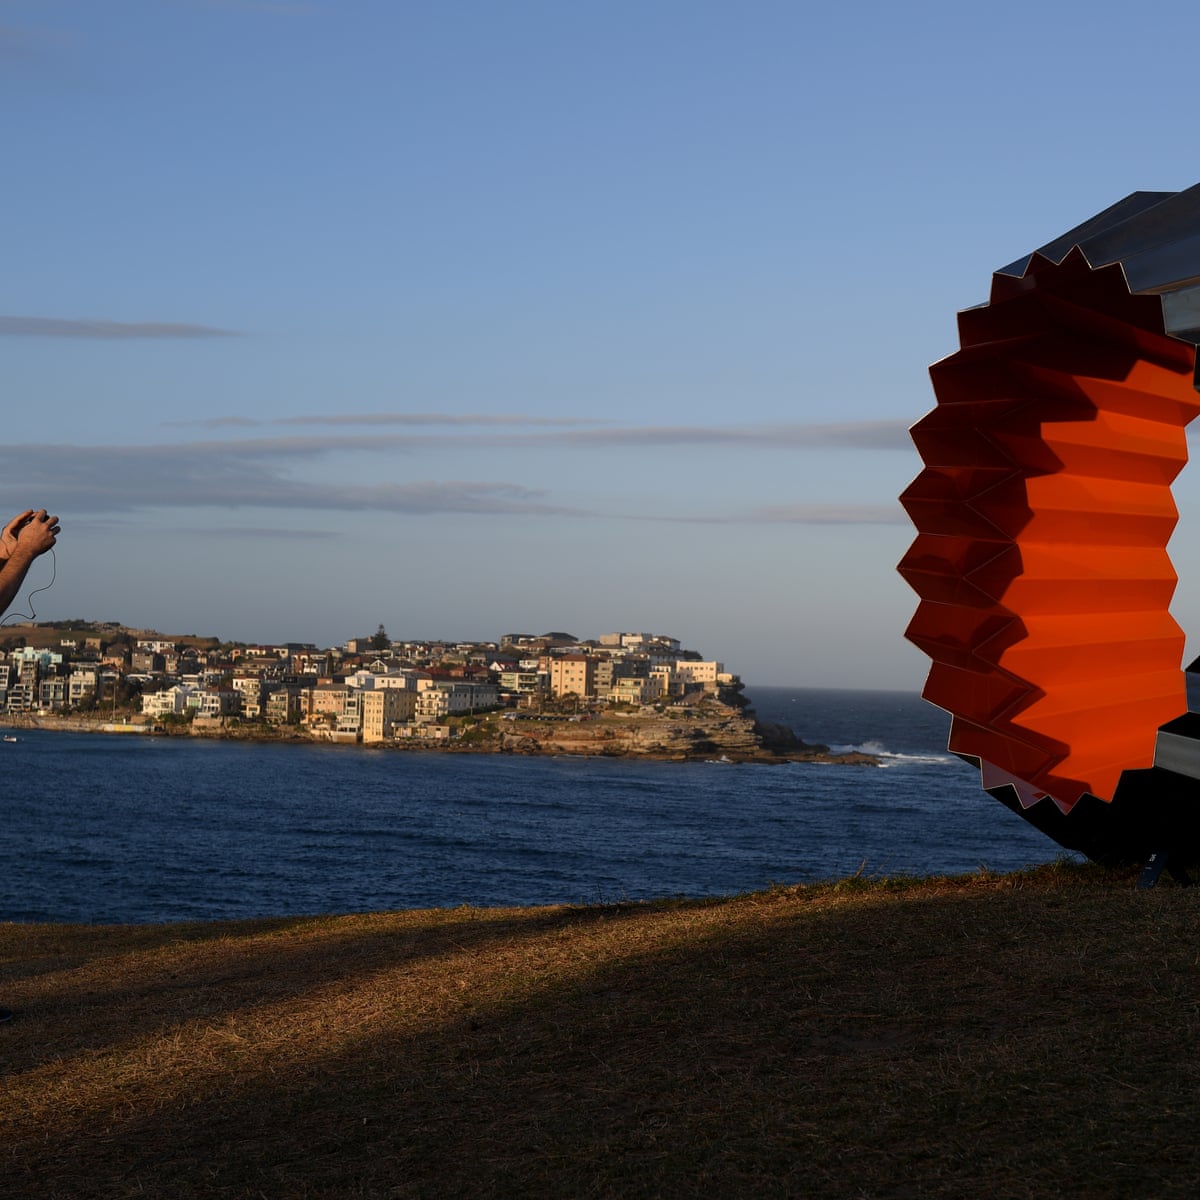 Sculpture By The Sea Threatens To Leave Bondi After Dispute Over New Path Sculpture The Guardian